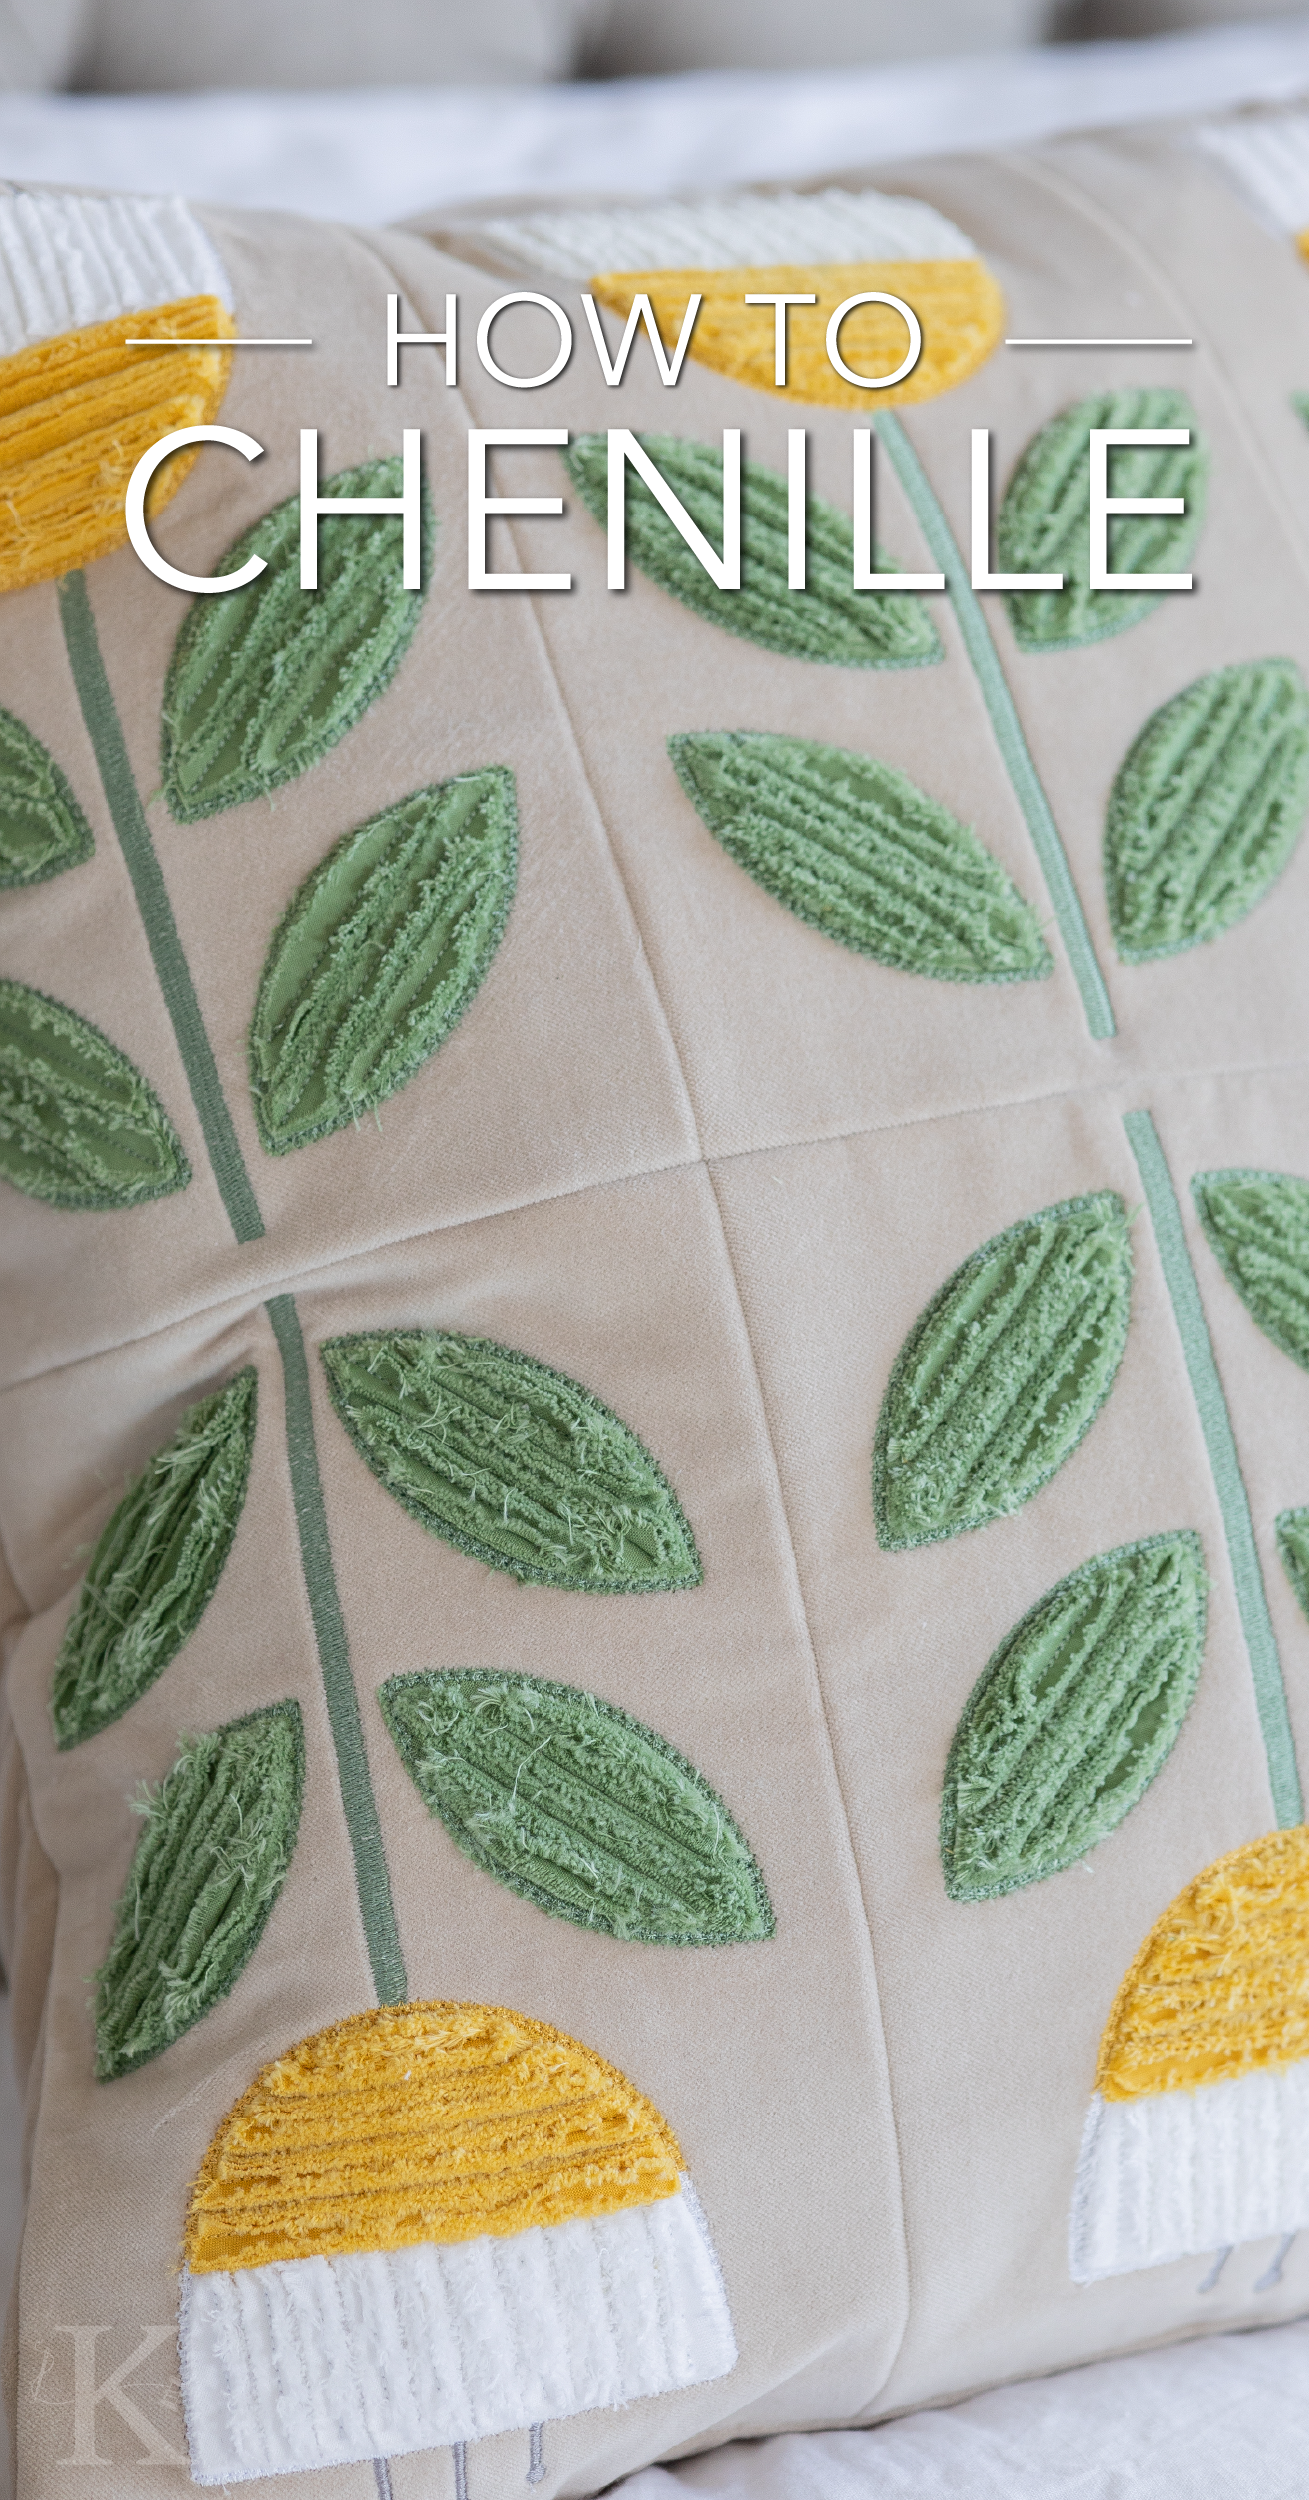 Make Chenille Fabric: Add some fun fabric texture to your projects!